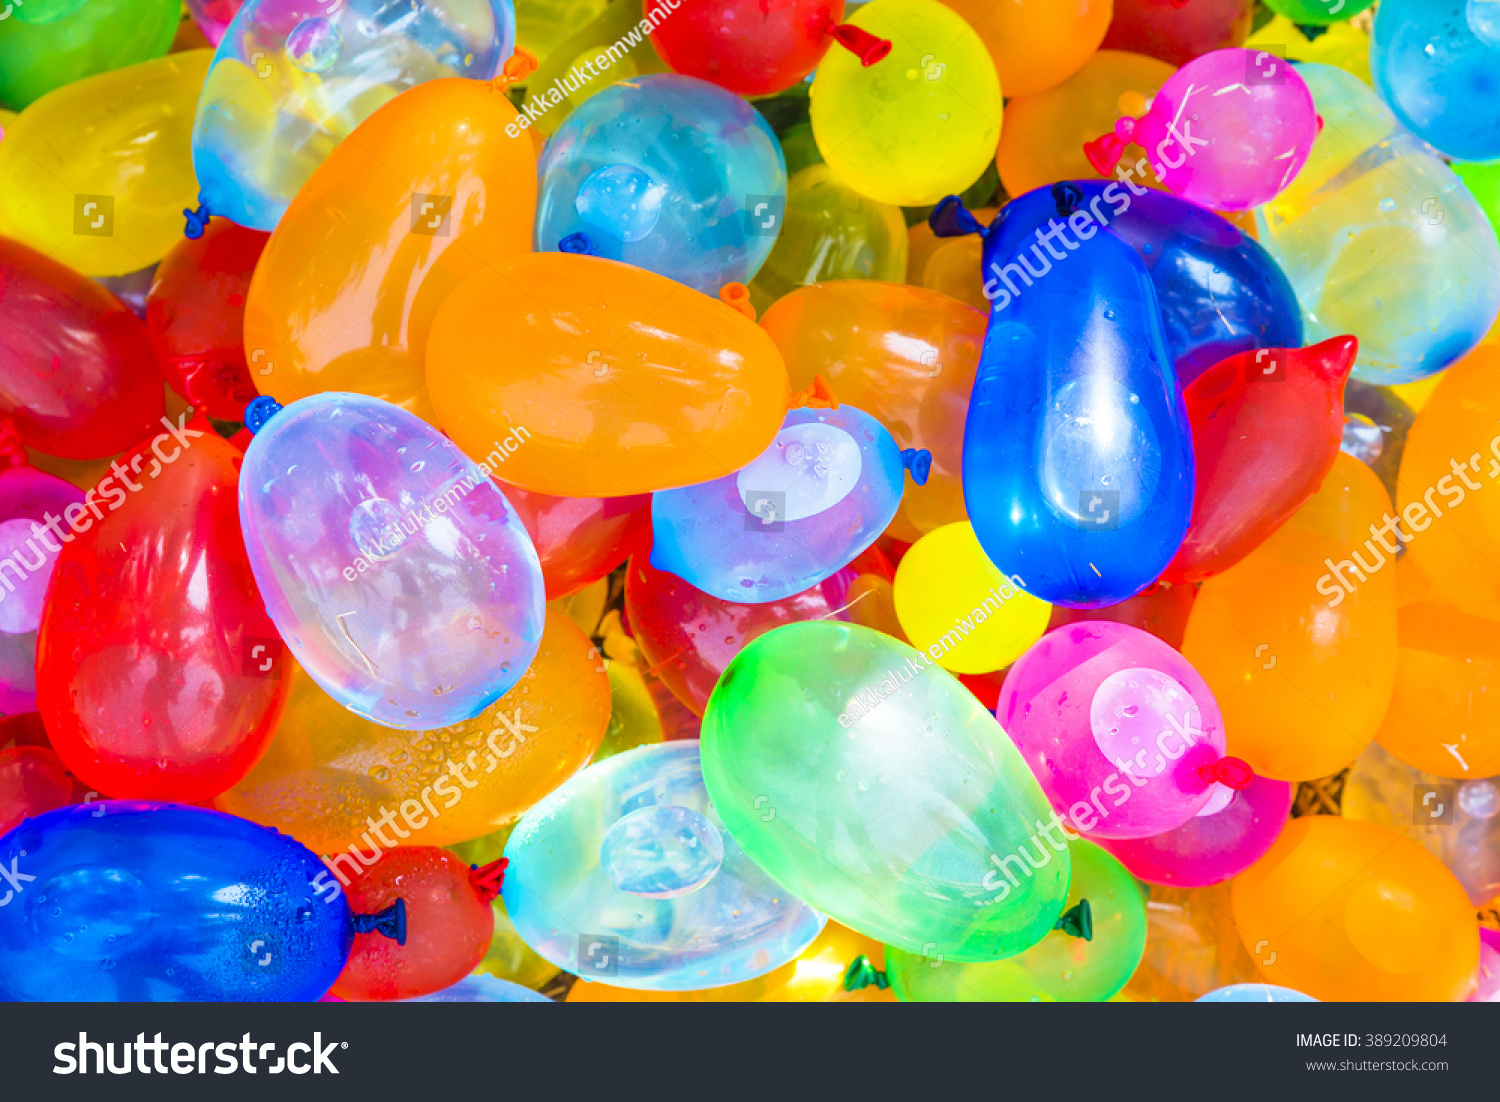 Many bright and colorful water balloons #389209804